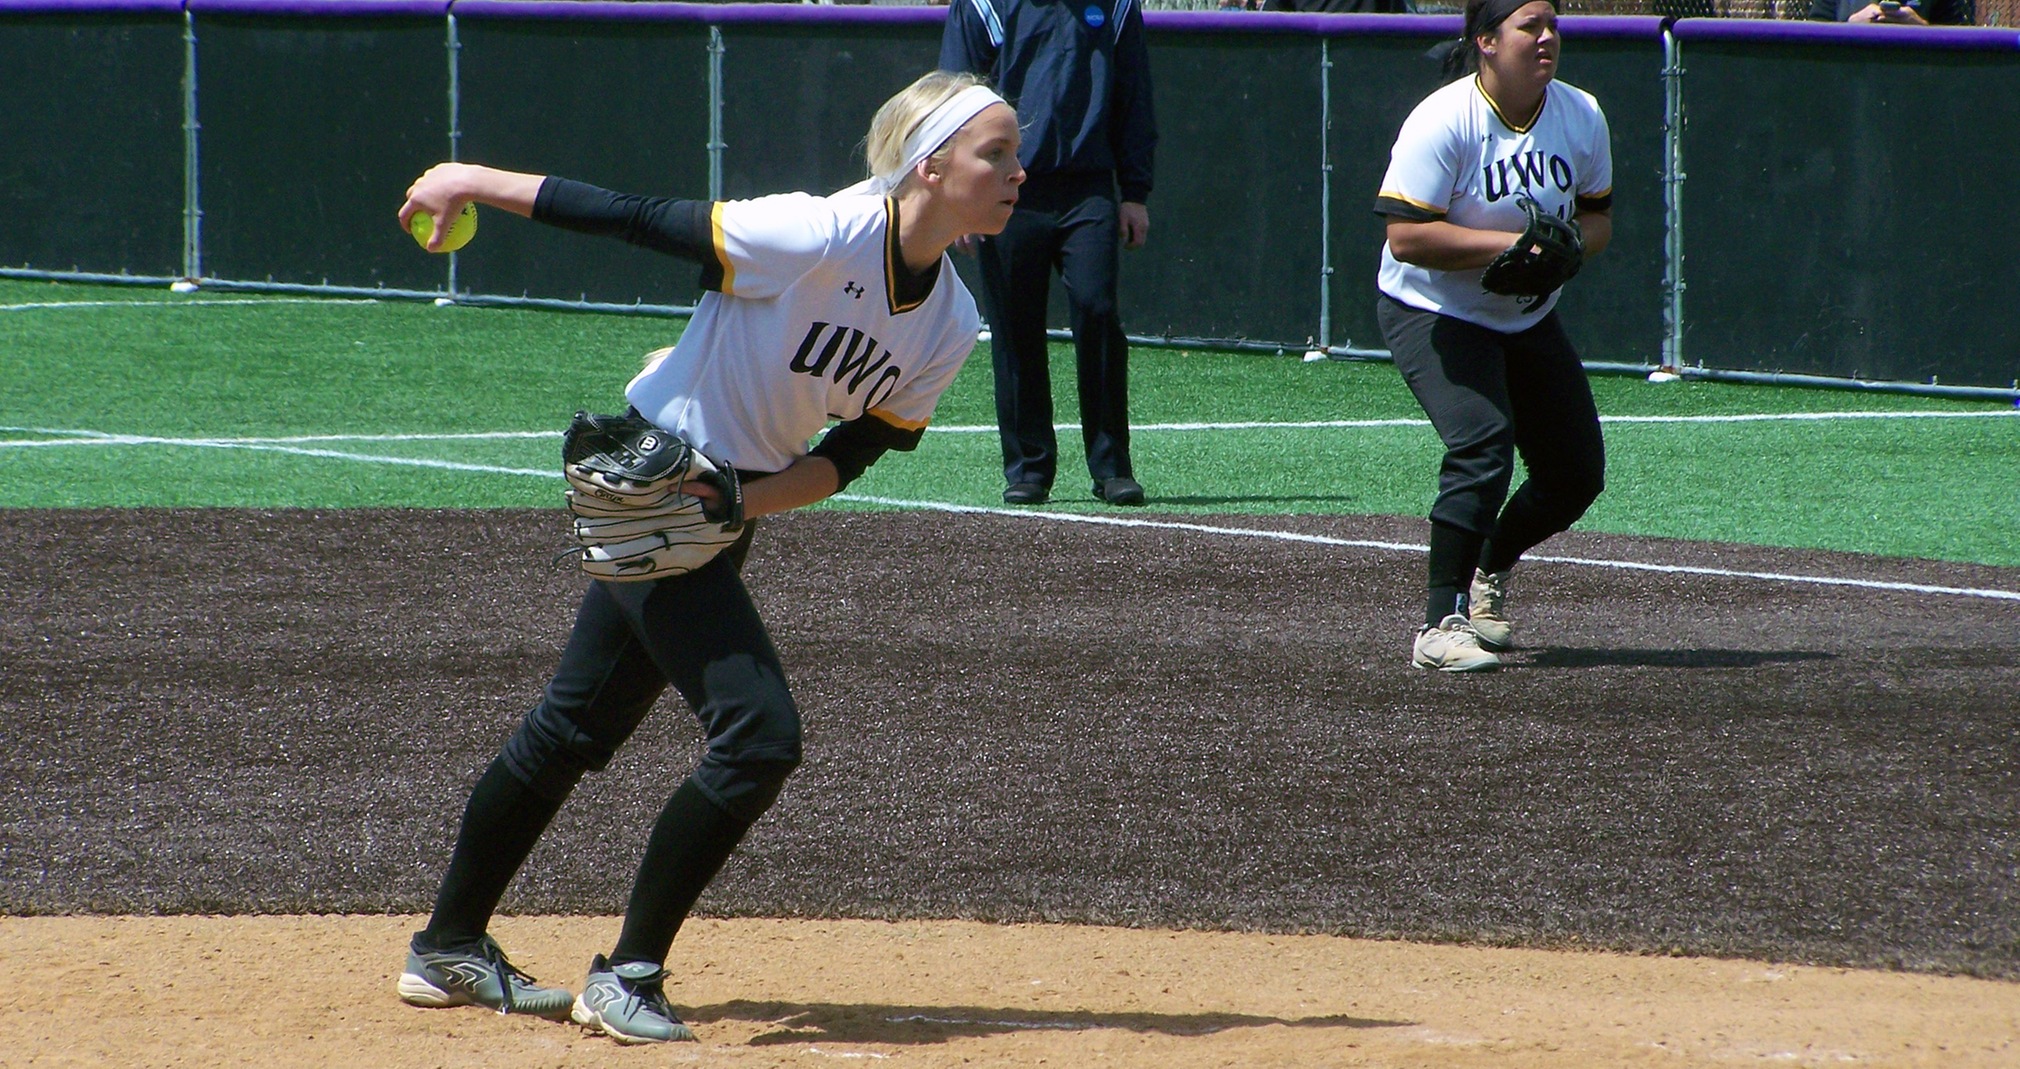 Bailey Smaney scattered 10 hits, all singles, during her complete-game performance against the Dutch.